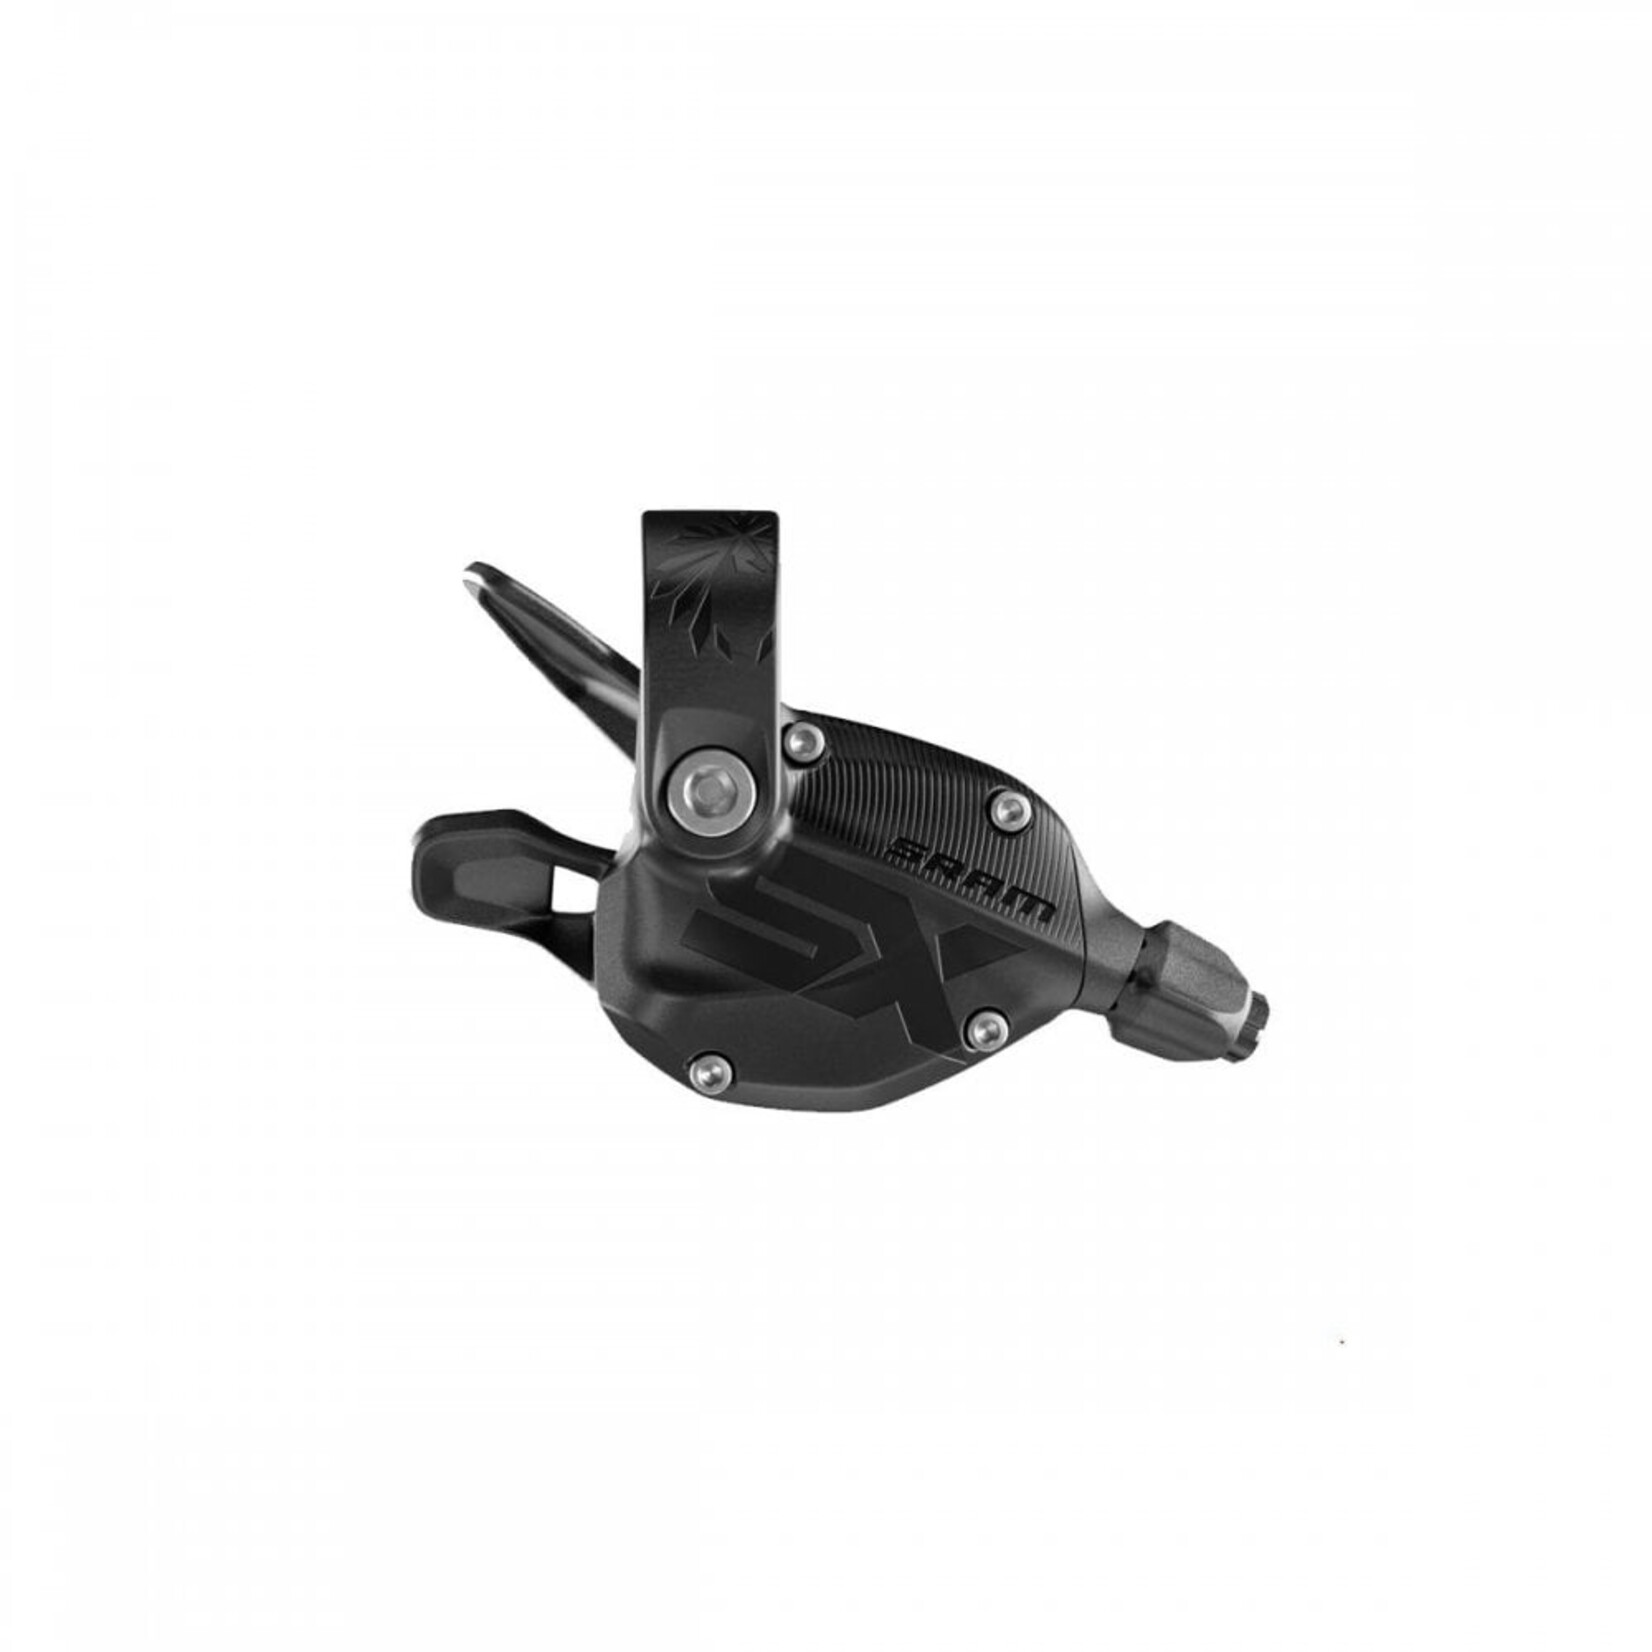 Sram SRAM SHIFTER SX EAGLE TRIGGER 12 SPEED REAR WITH DISCRETE CLAMP A1: BLACK 12 SPEED